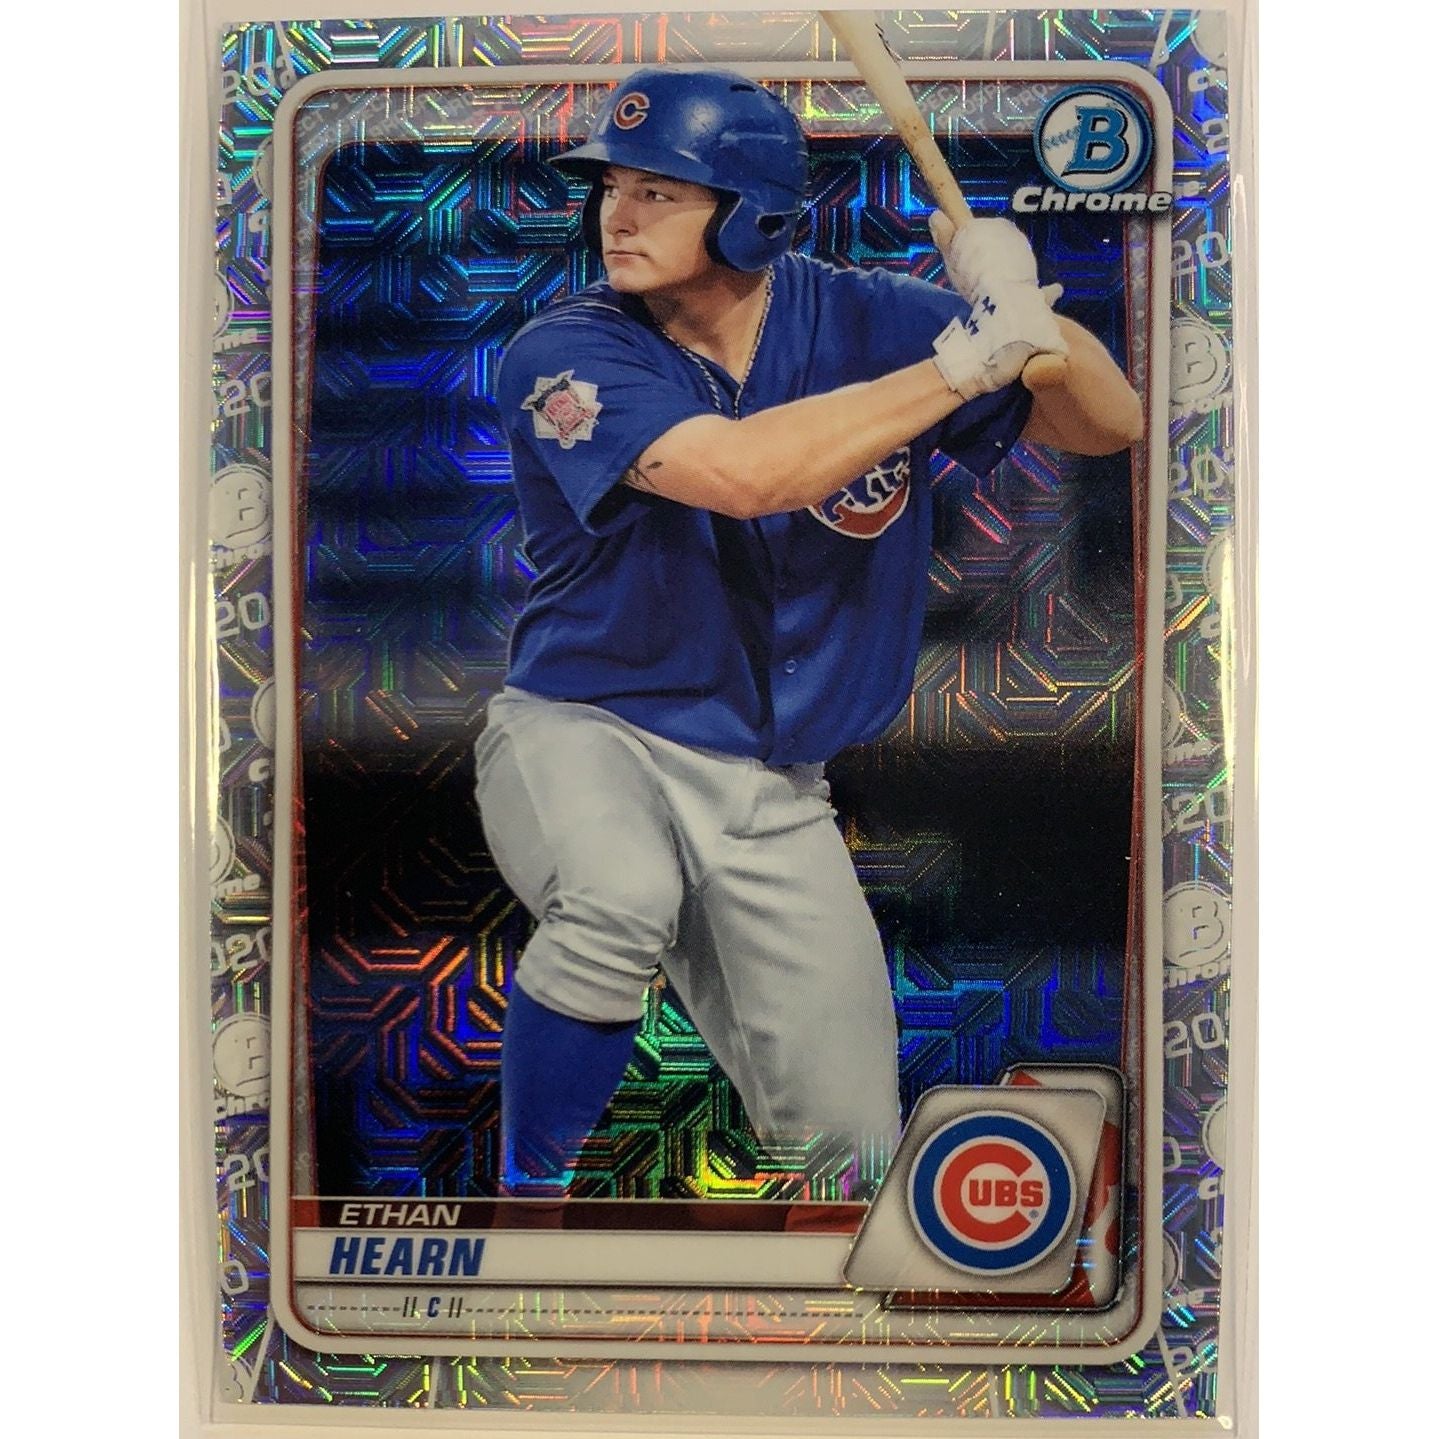  2020 Bowman Chrome Ethan Hearn Mojo Refractor  Local Legends Cards & Collectibles